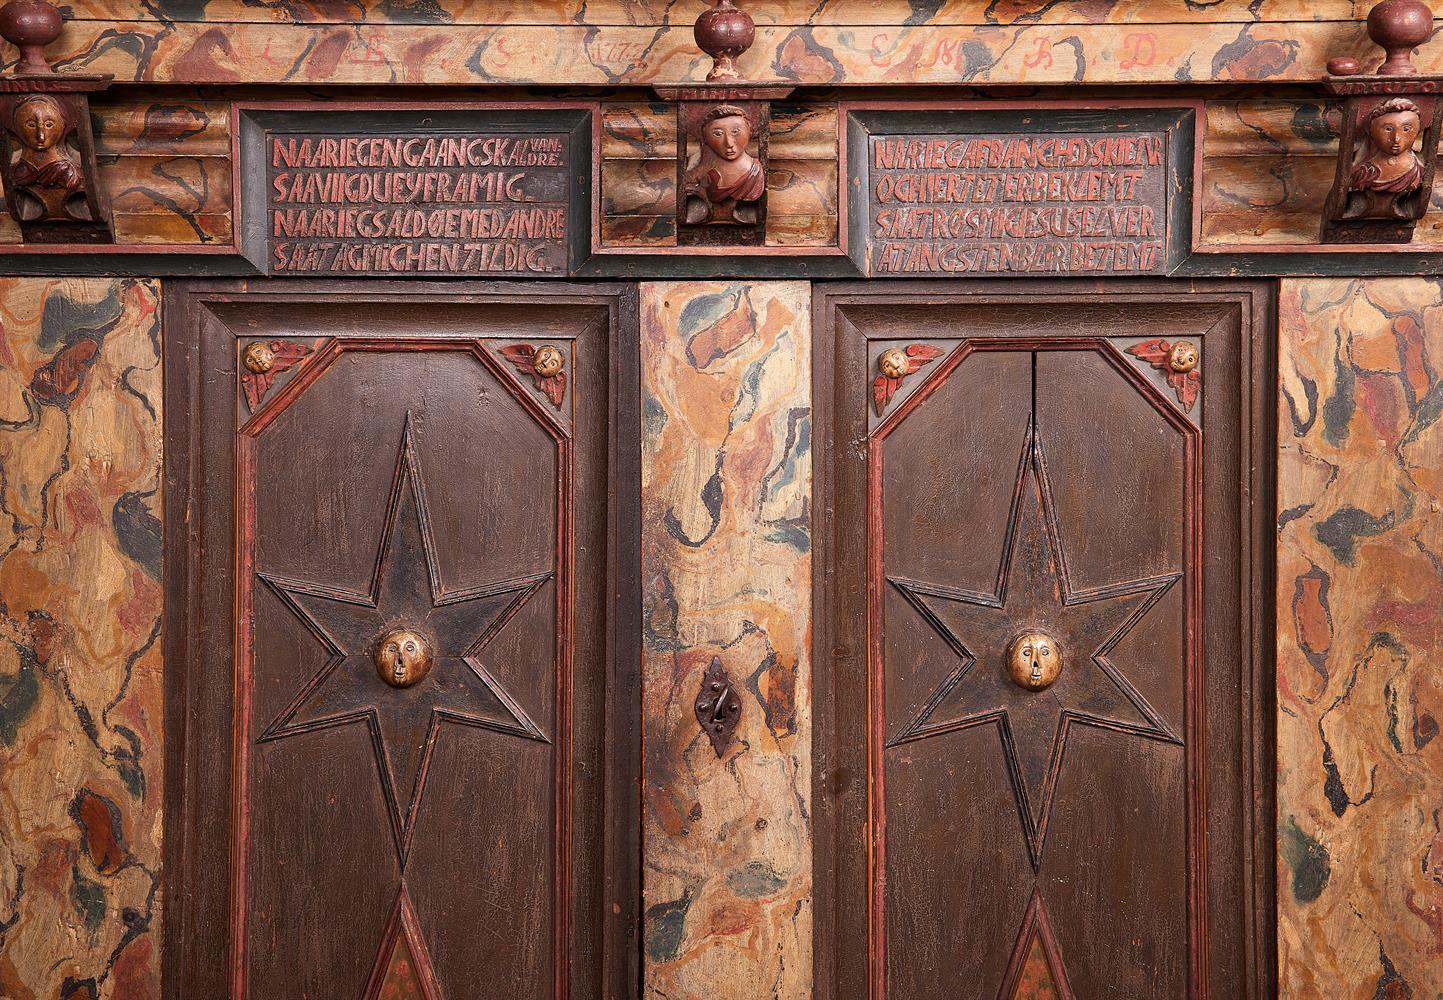 A LARGE DANISH PAINTED CABINET, CIRCA 1740 - Image 2 of 4